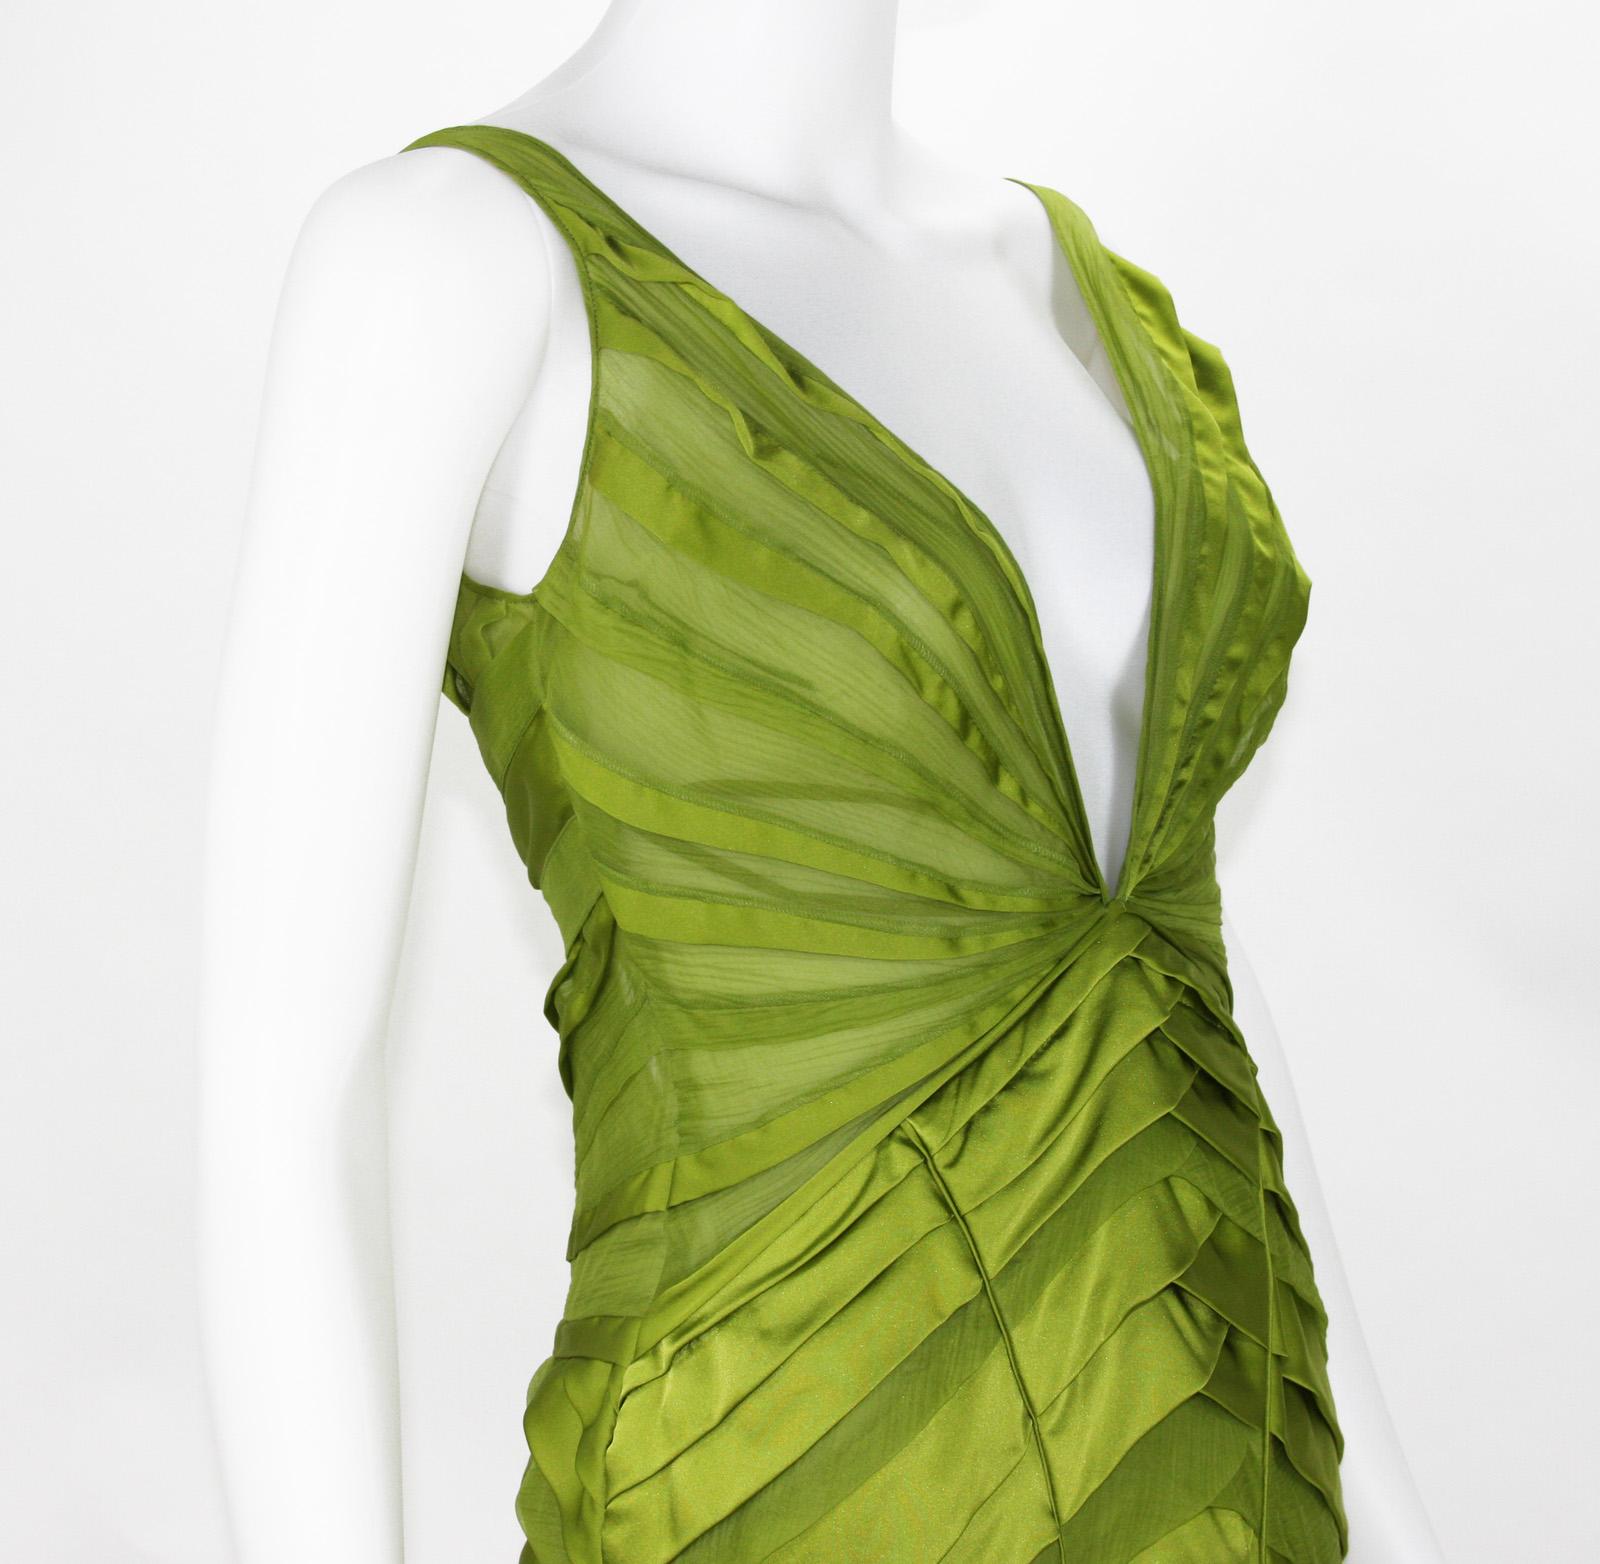 Tom Ford for Gucci 2004 F/W Collection Silk Green Tassel Dress Gown 40 - 4 3